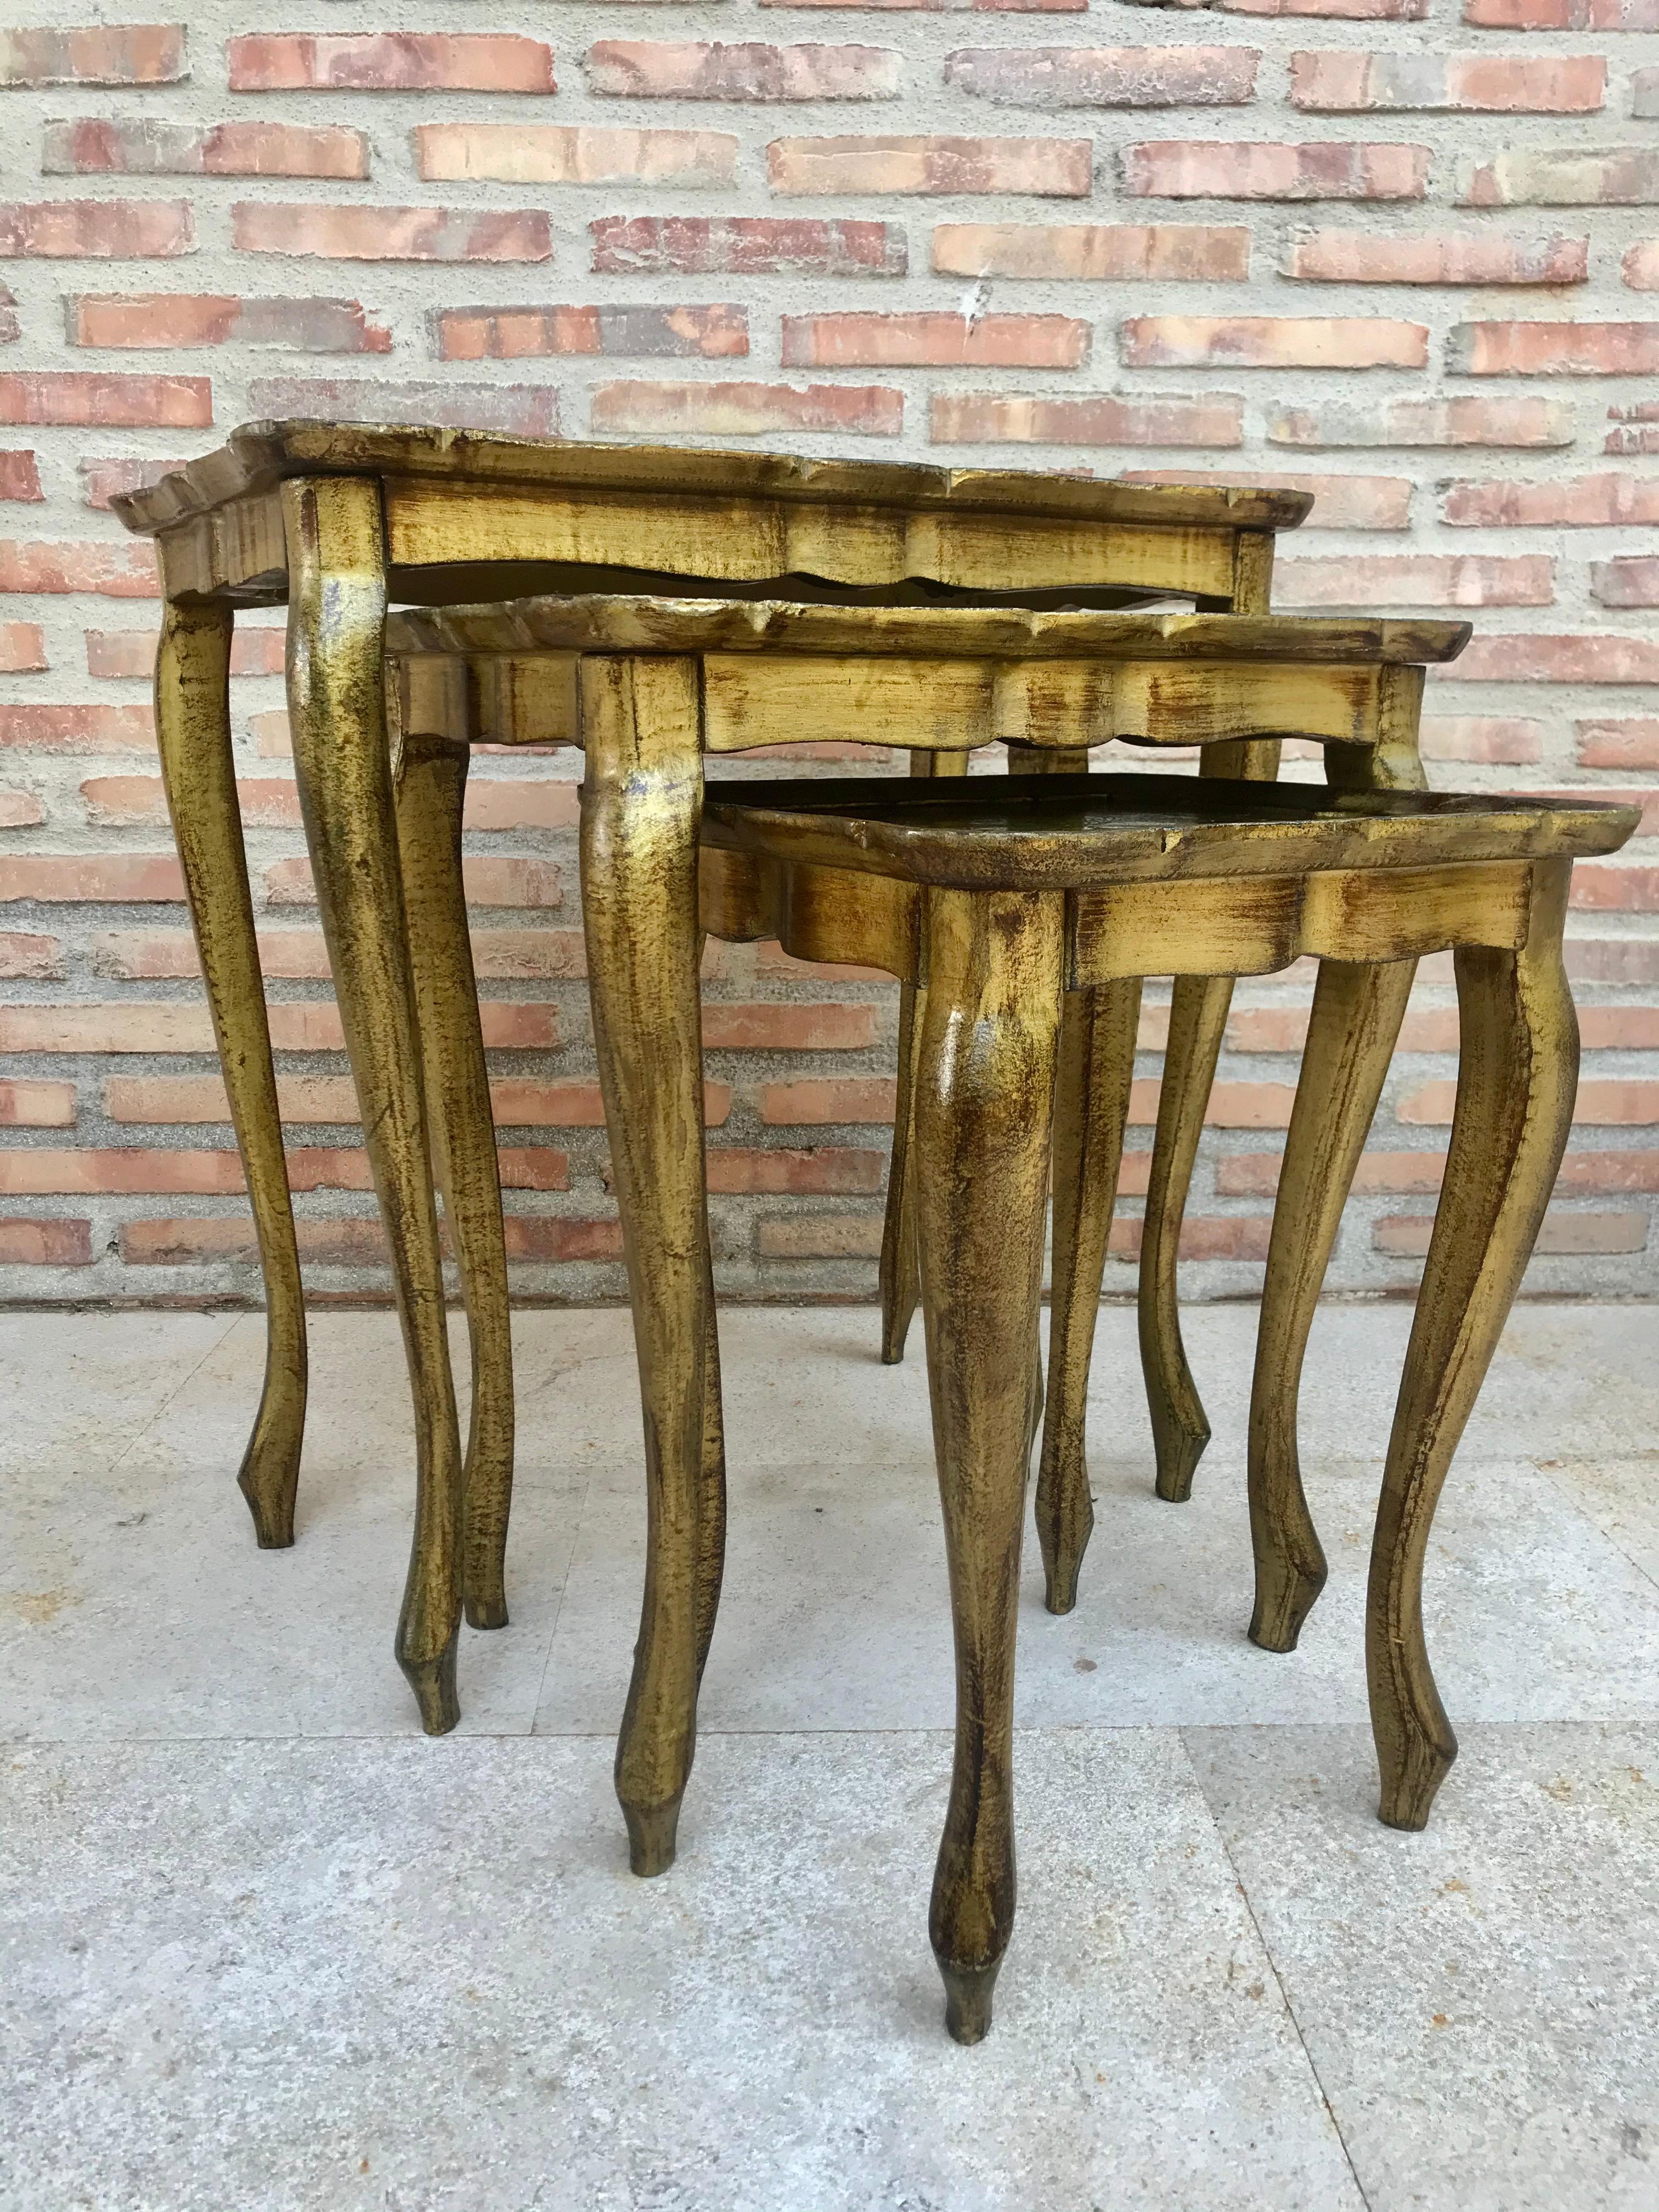 This stylish nest of 3 giltwood side tables feature slender cabriole shaped legs and handmade green paintings.

Measures: Depth 14.17in, width 21.65in, height 22.83in
Depth 12.59in, width 16.92in, height 20in
Depth 12.8in, width 12.8in, height